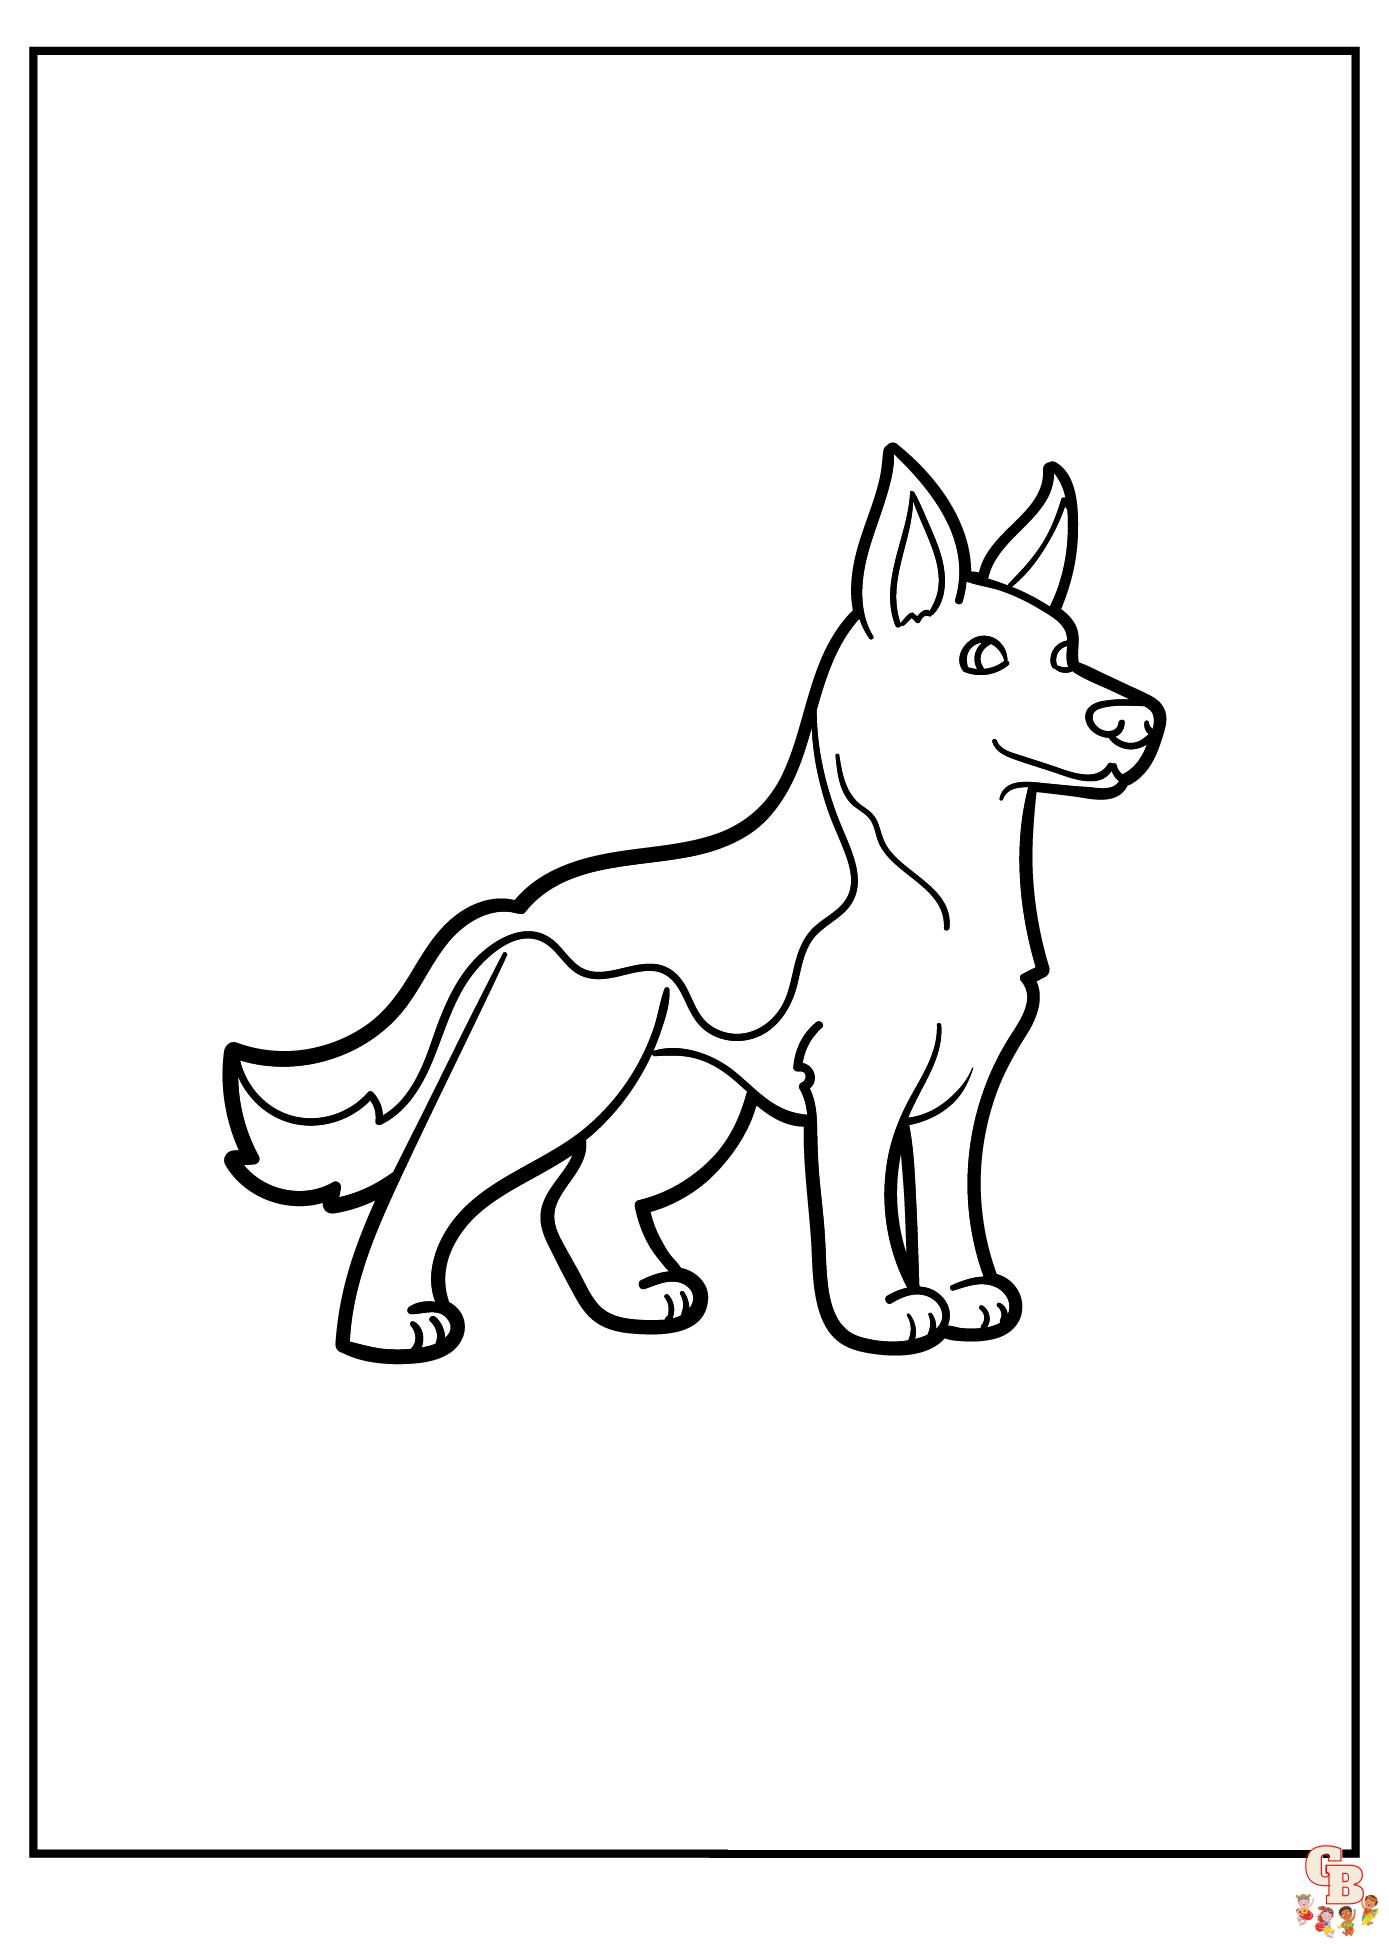 Get Creative with Cute German Shepherd Coloring Pages